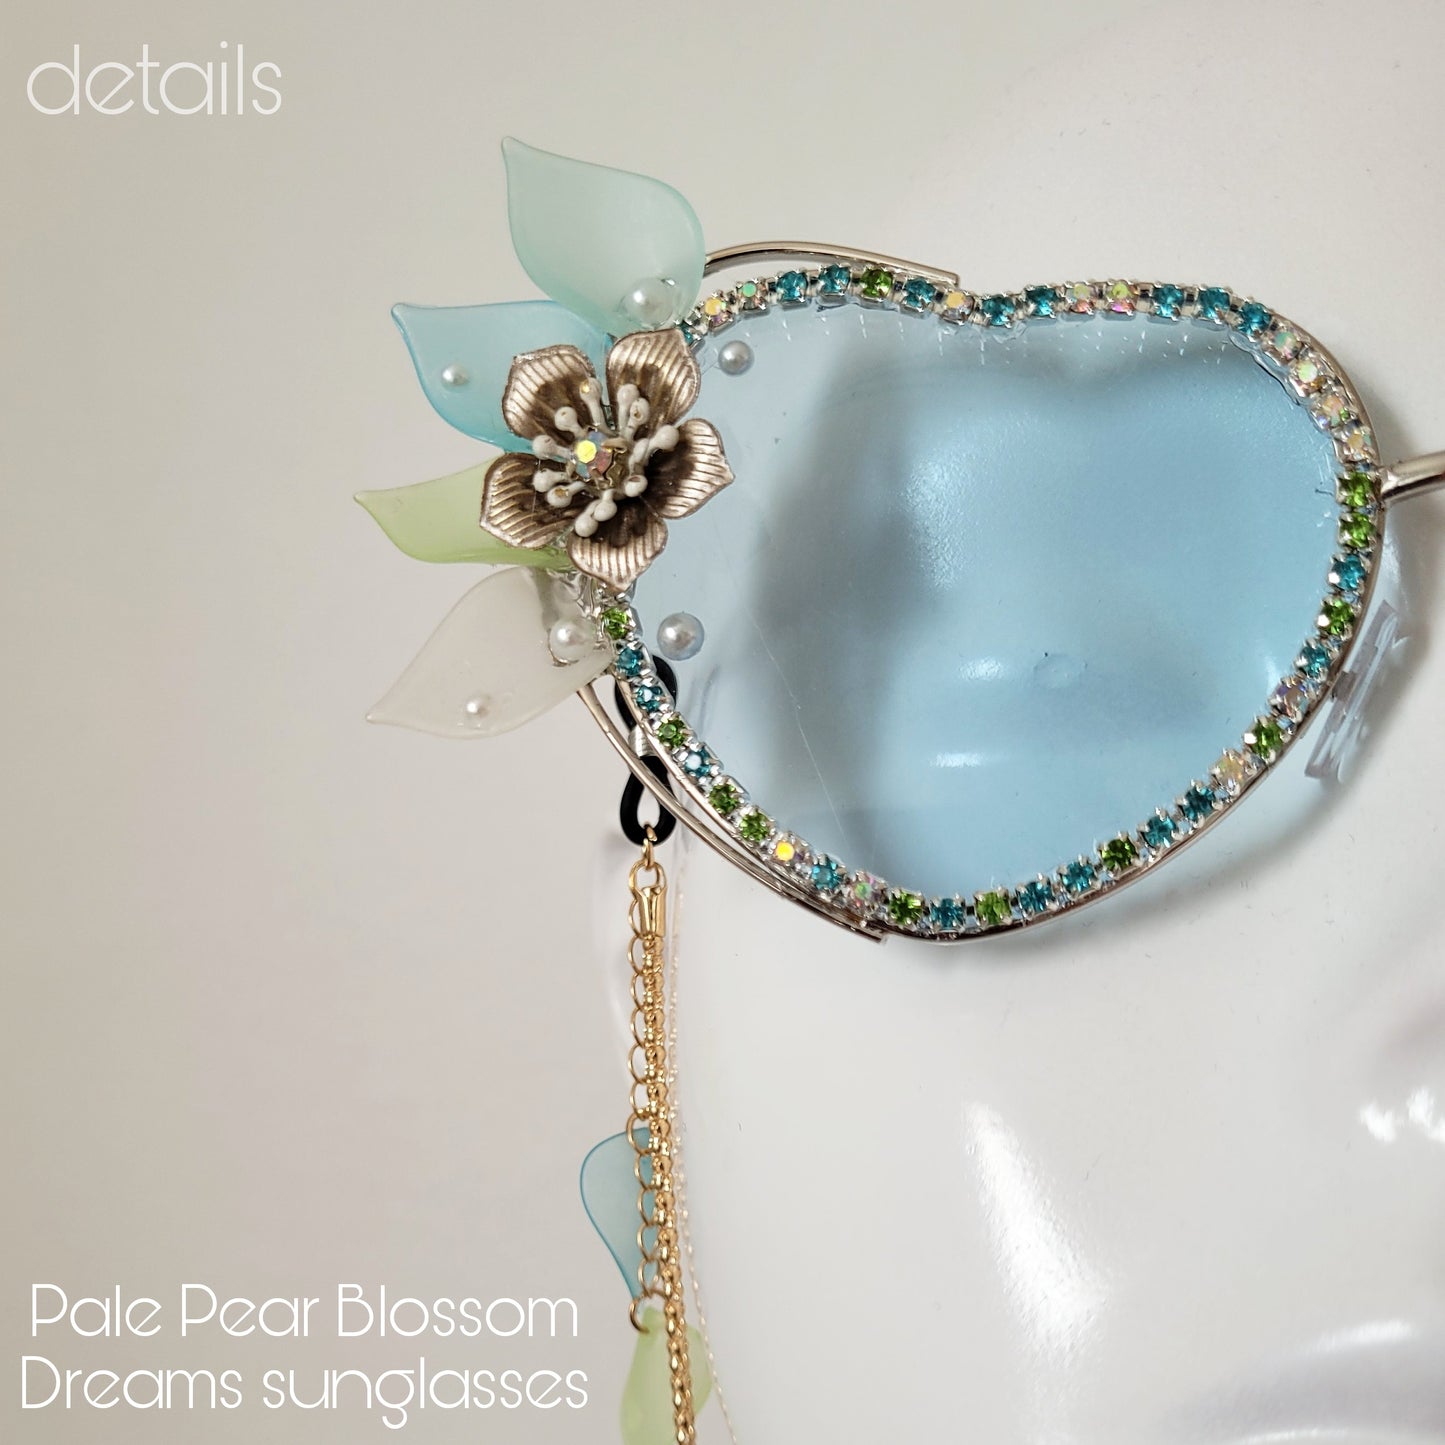 Bumblebee Dreams collection: the Pale Pear Blossom Dreams Sunglasses